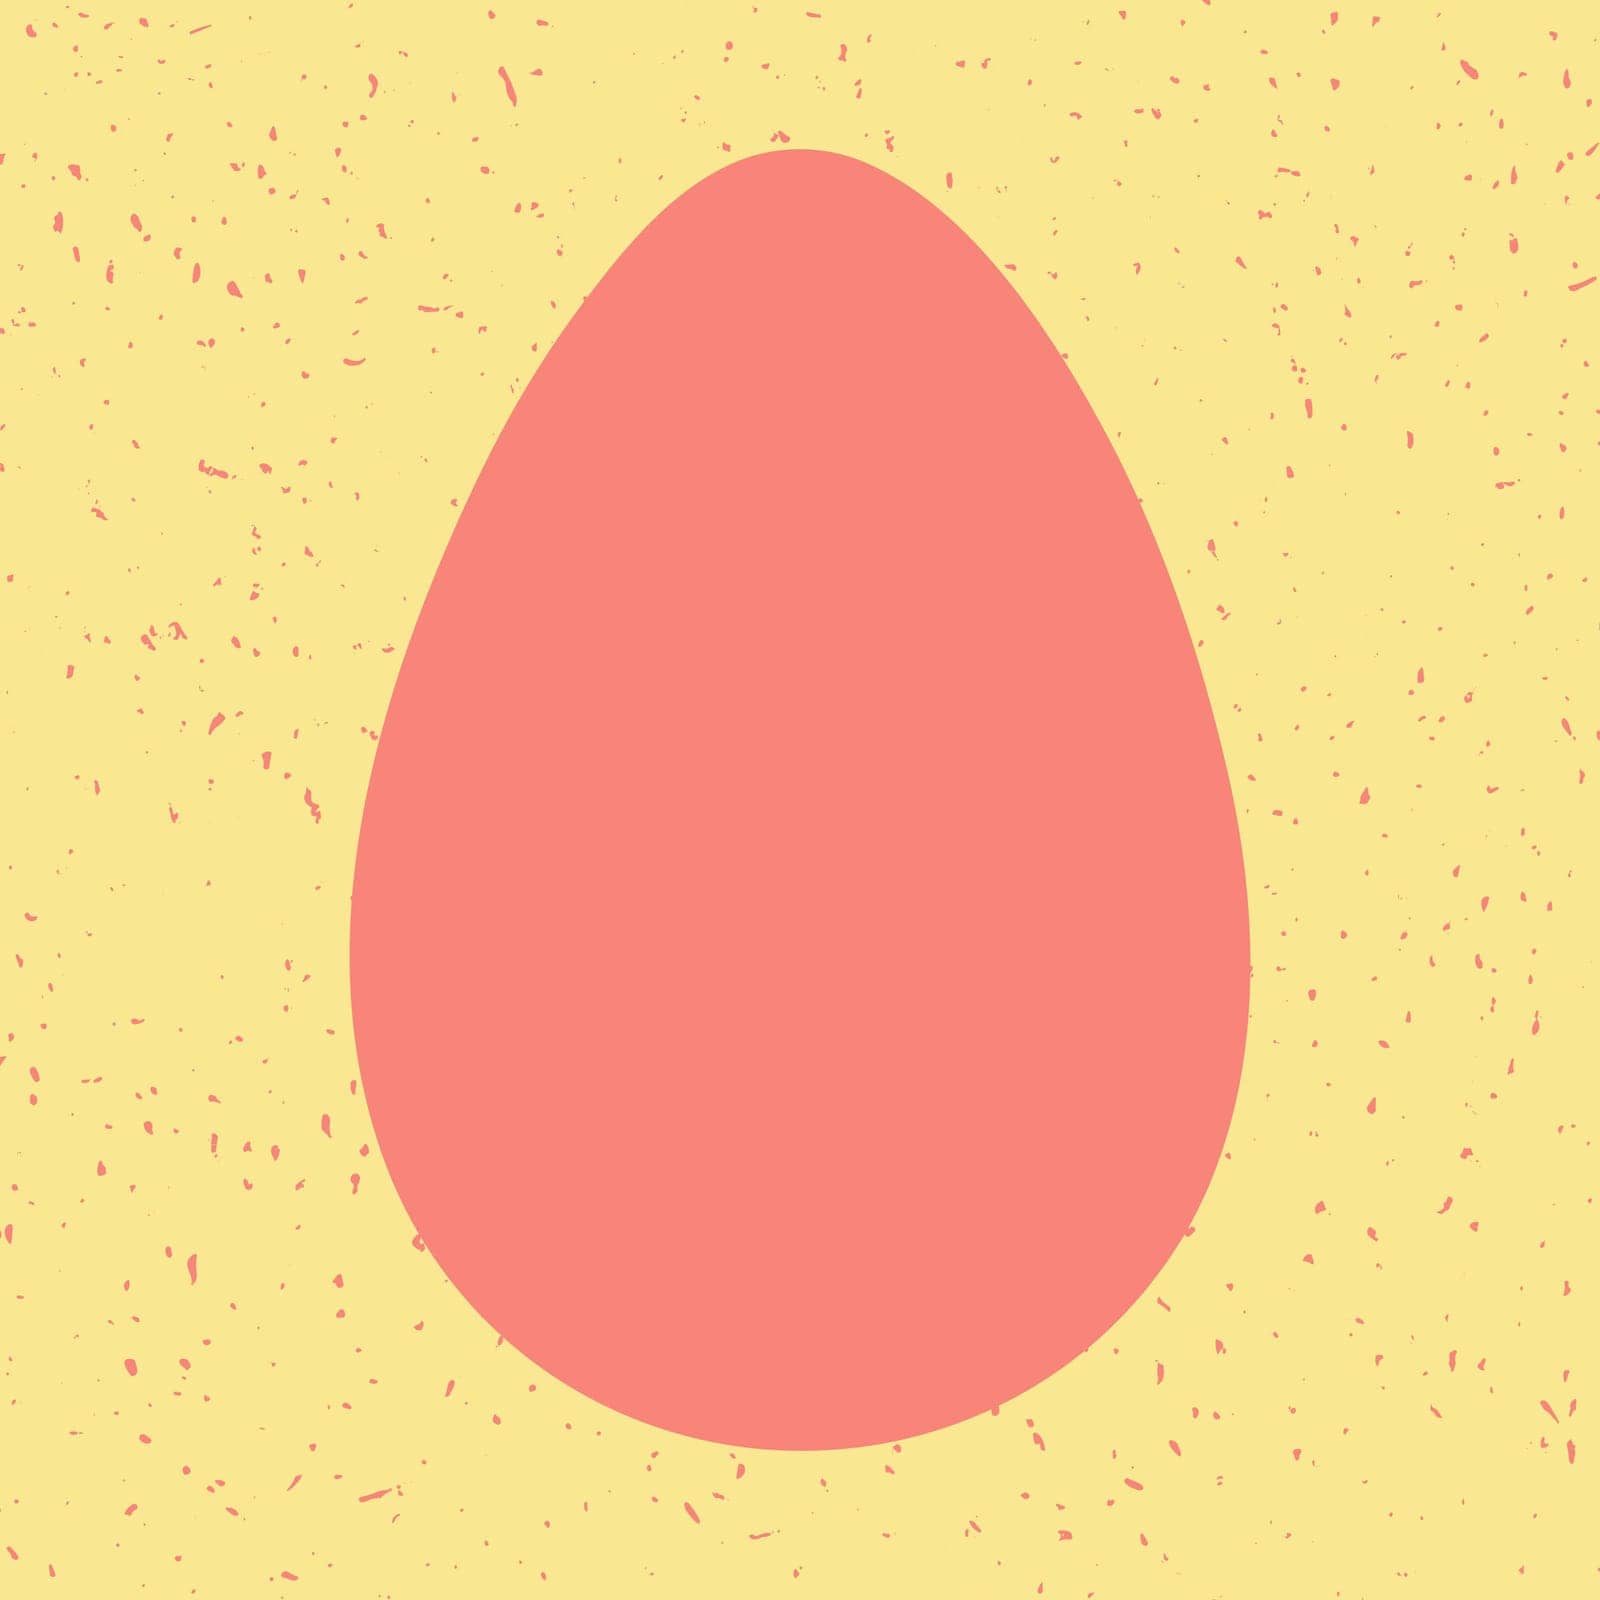 Pink Easter egg vector illustration. Colored egg shape on textured yellow background. Flat cartoon Happy Easter poster, card, icon. Modern egg hunt simple design. by Olya_Haifisch